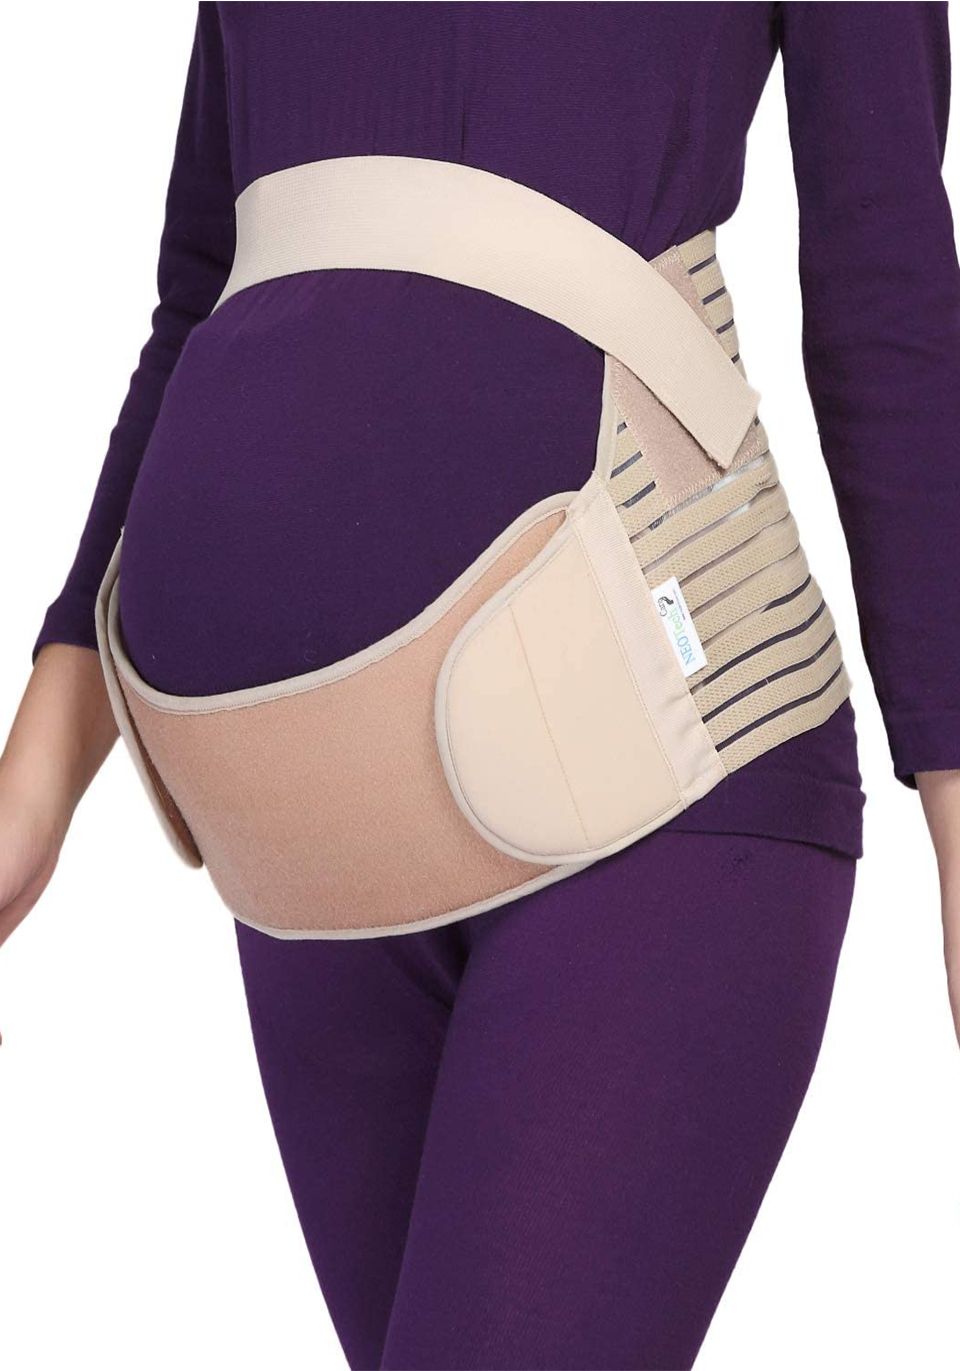 LNGOOR Neotech Care 3-in-1 Maternity Pregnancy Support, Postpartum